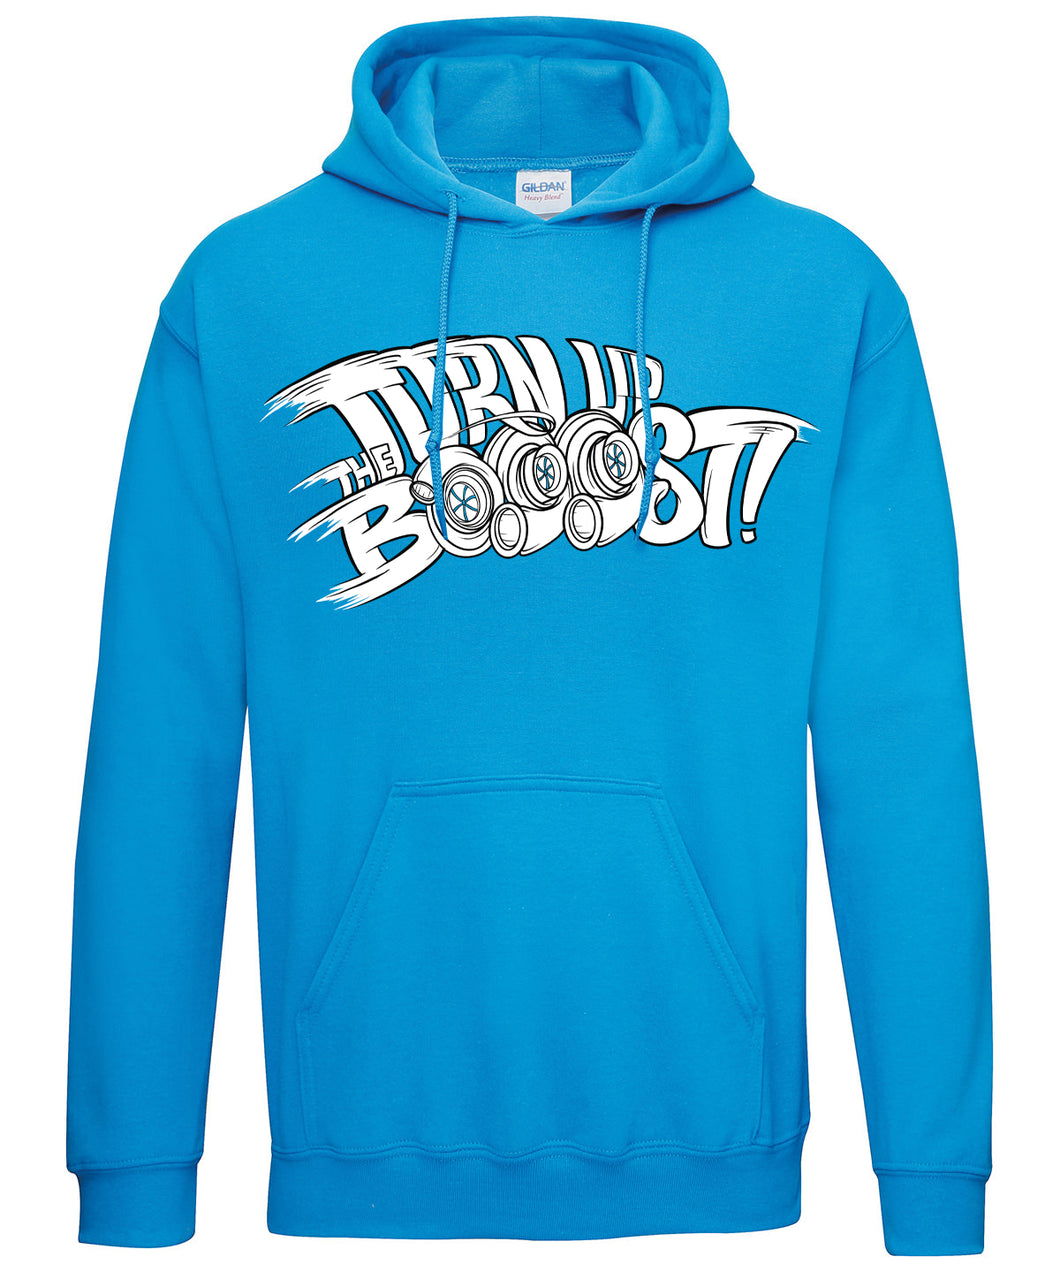 TURN UP THE BOOST! Hoodie Blue